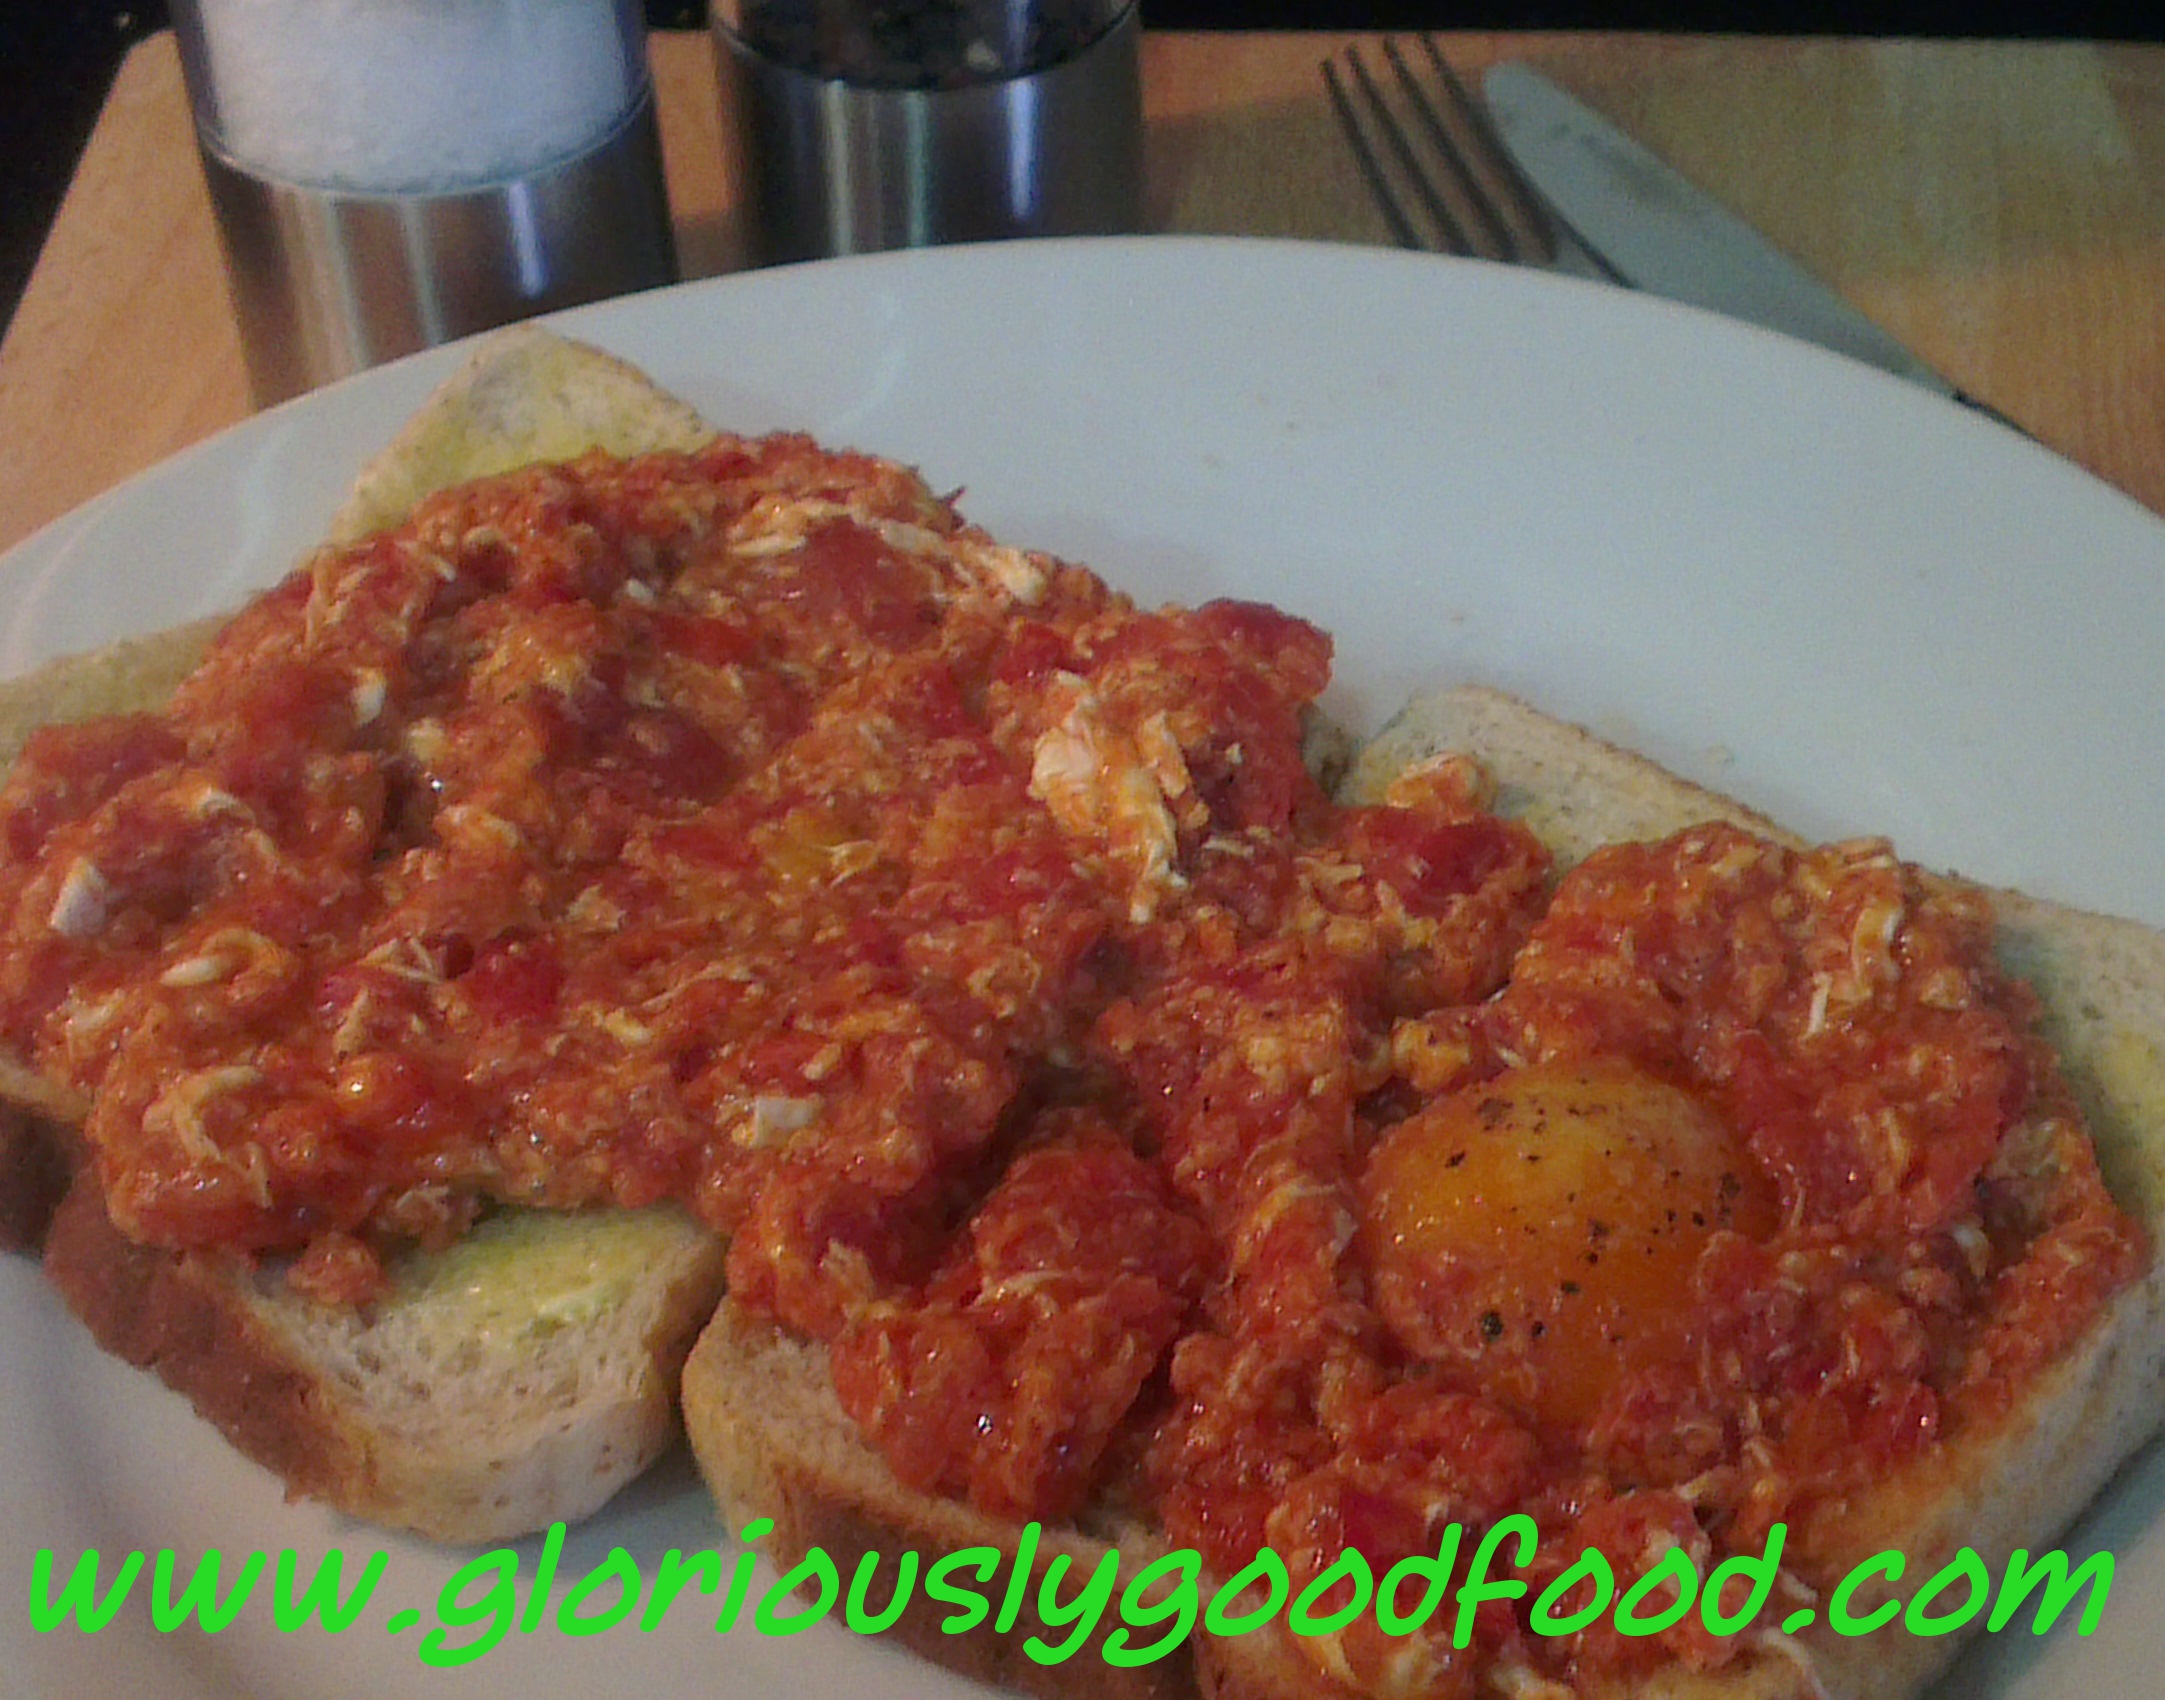 Tomato Fried Eggs | Eggs poached in Tomatoes | Eggs scrambled in Tomatoes